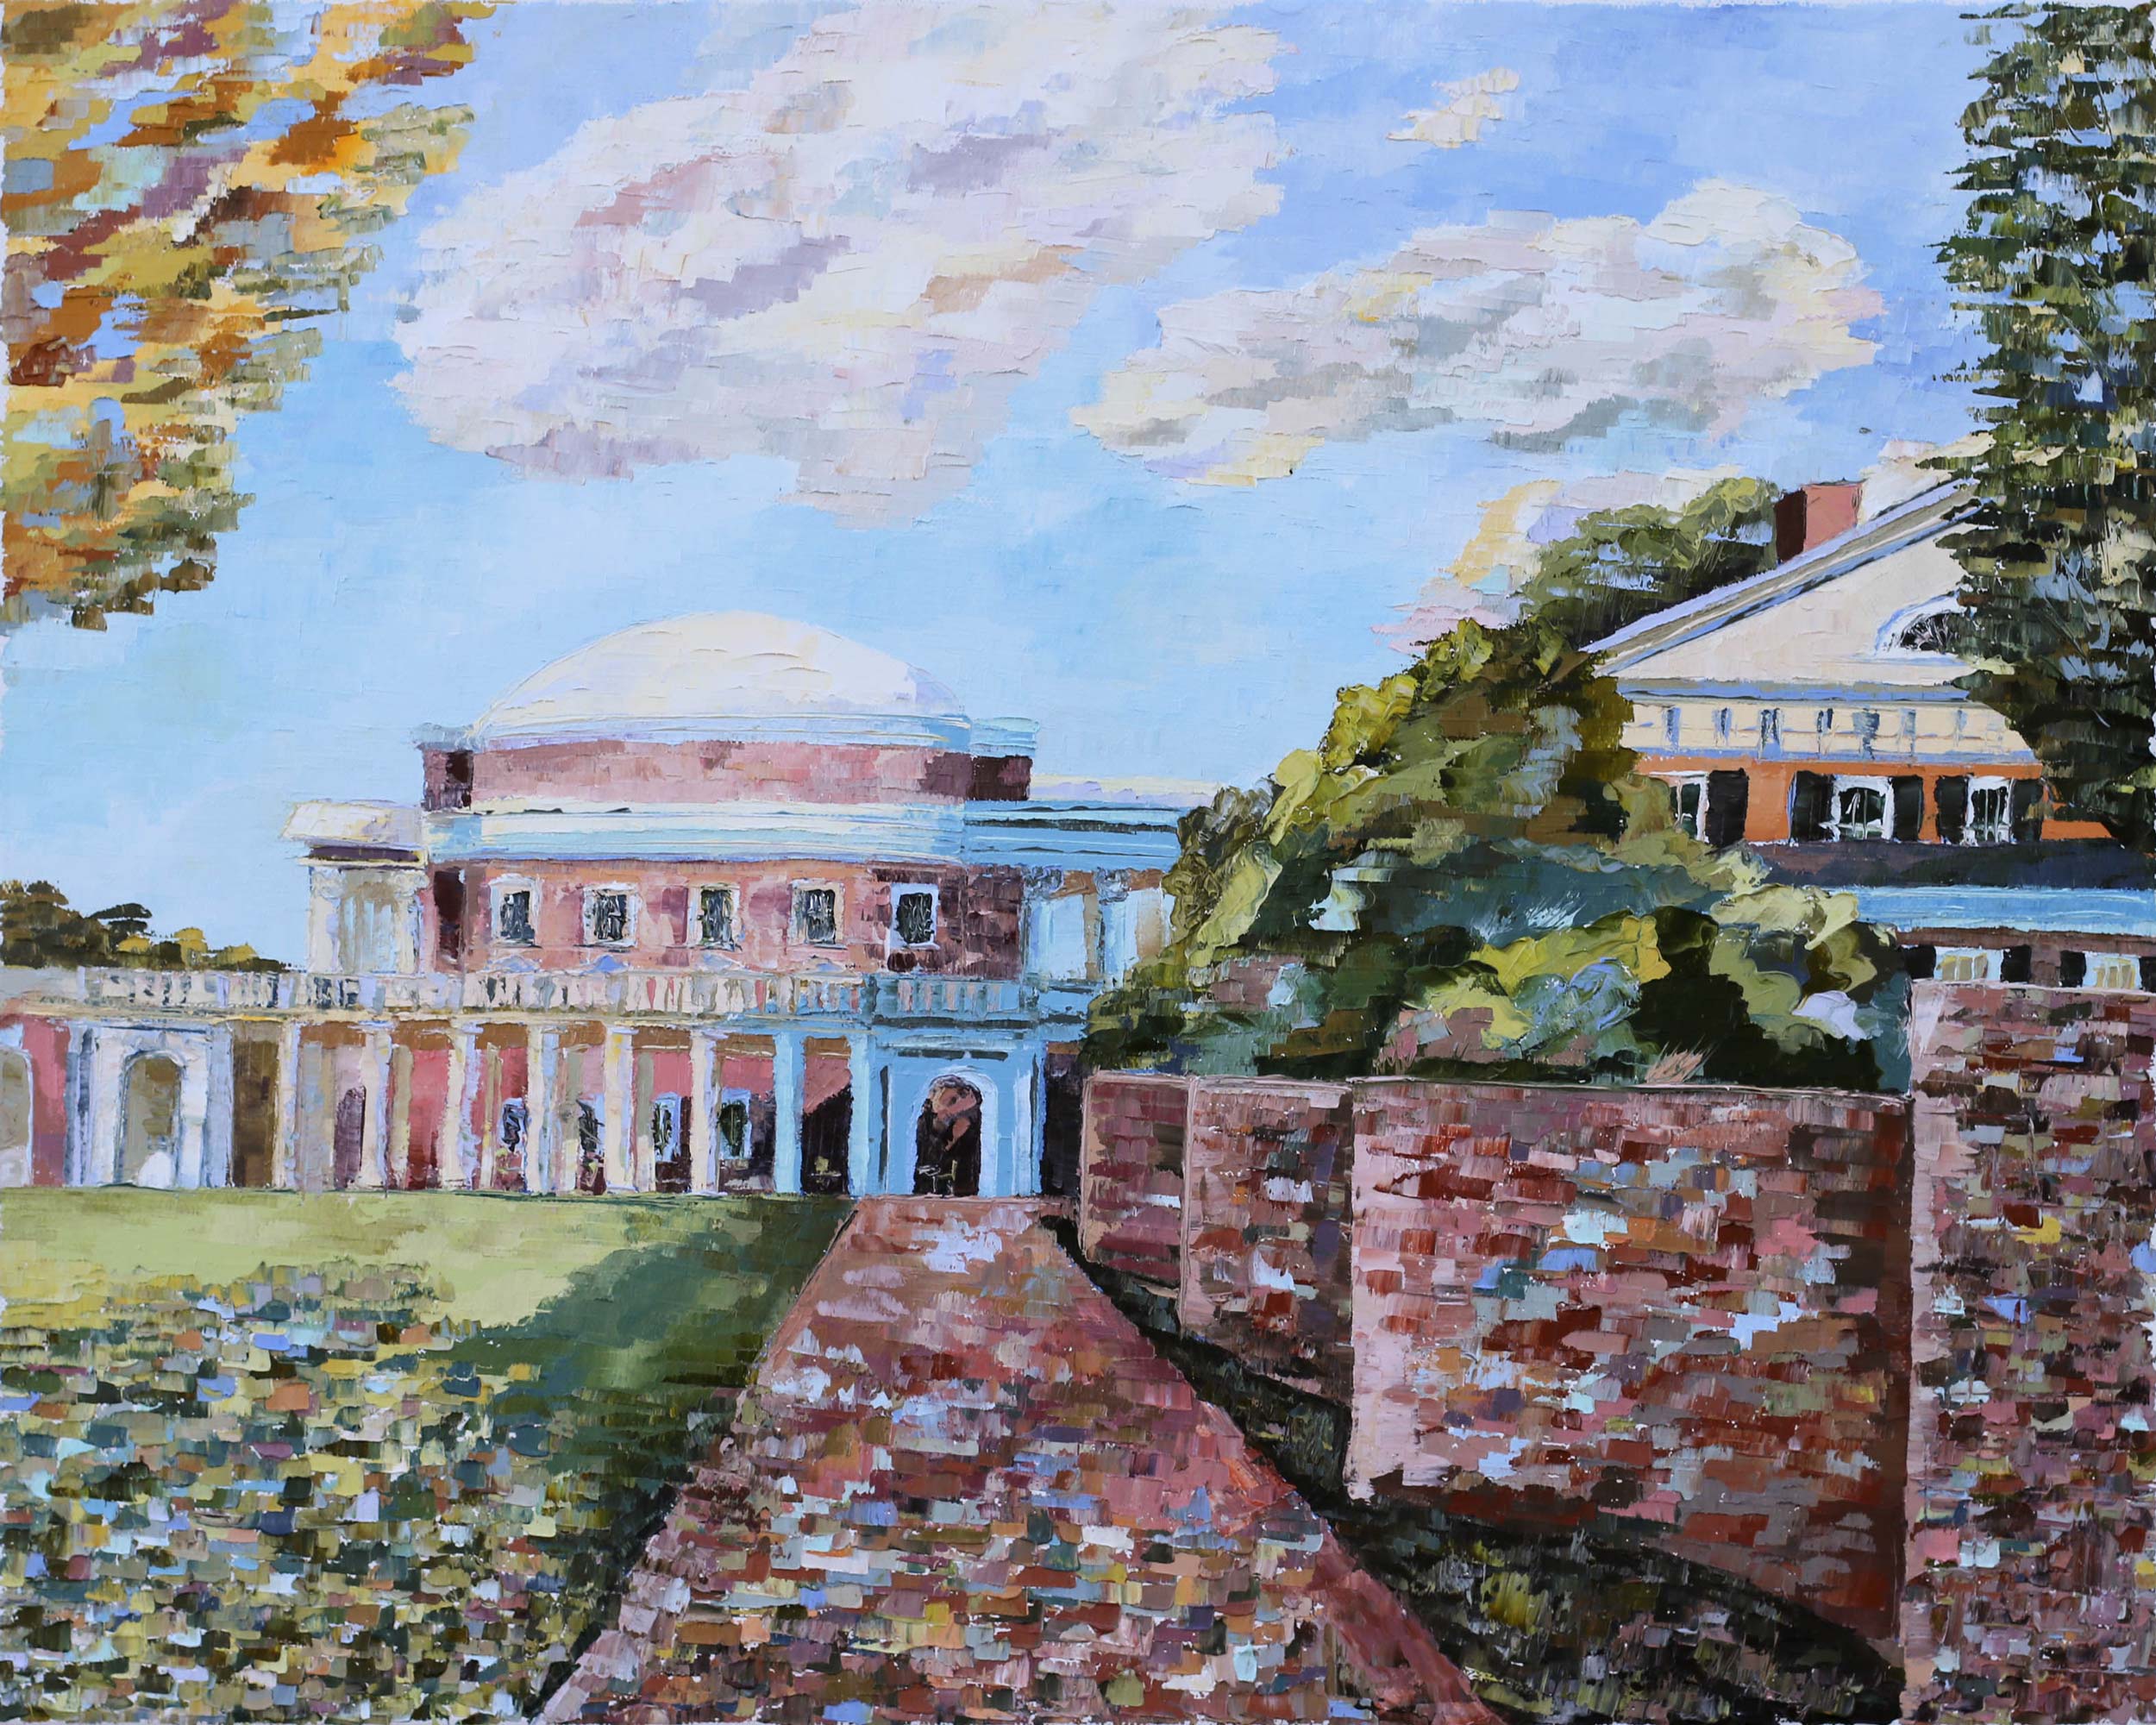 Davis’ “Rotunda and Pavilion I” painting has a serpentine wall and a side view of the Rotunda